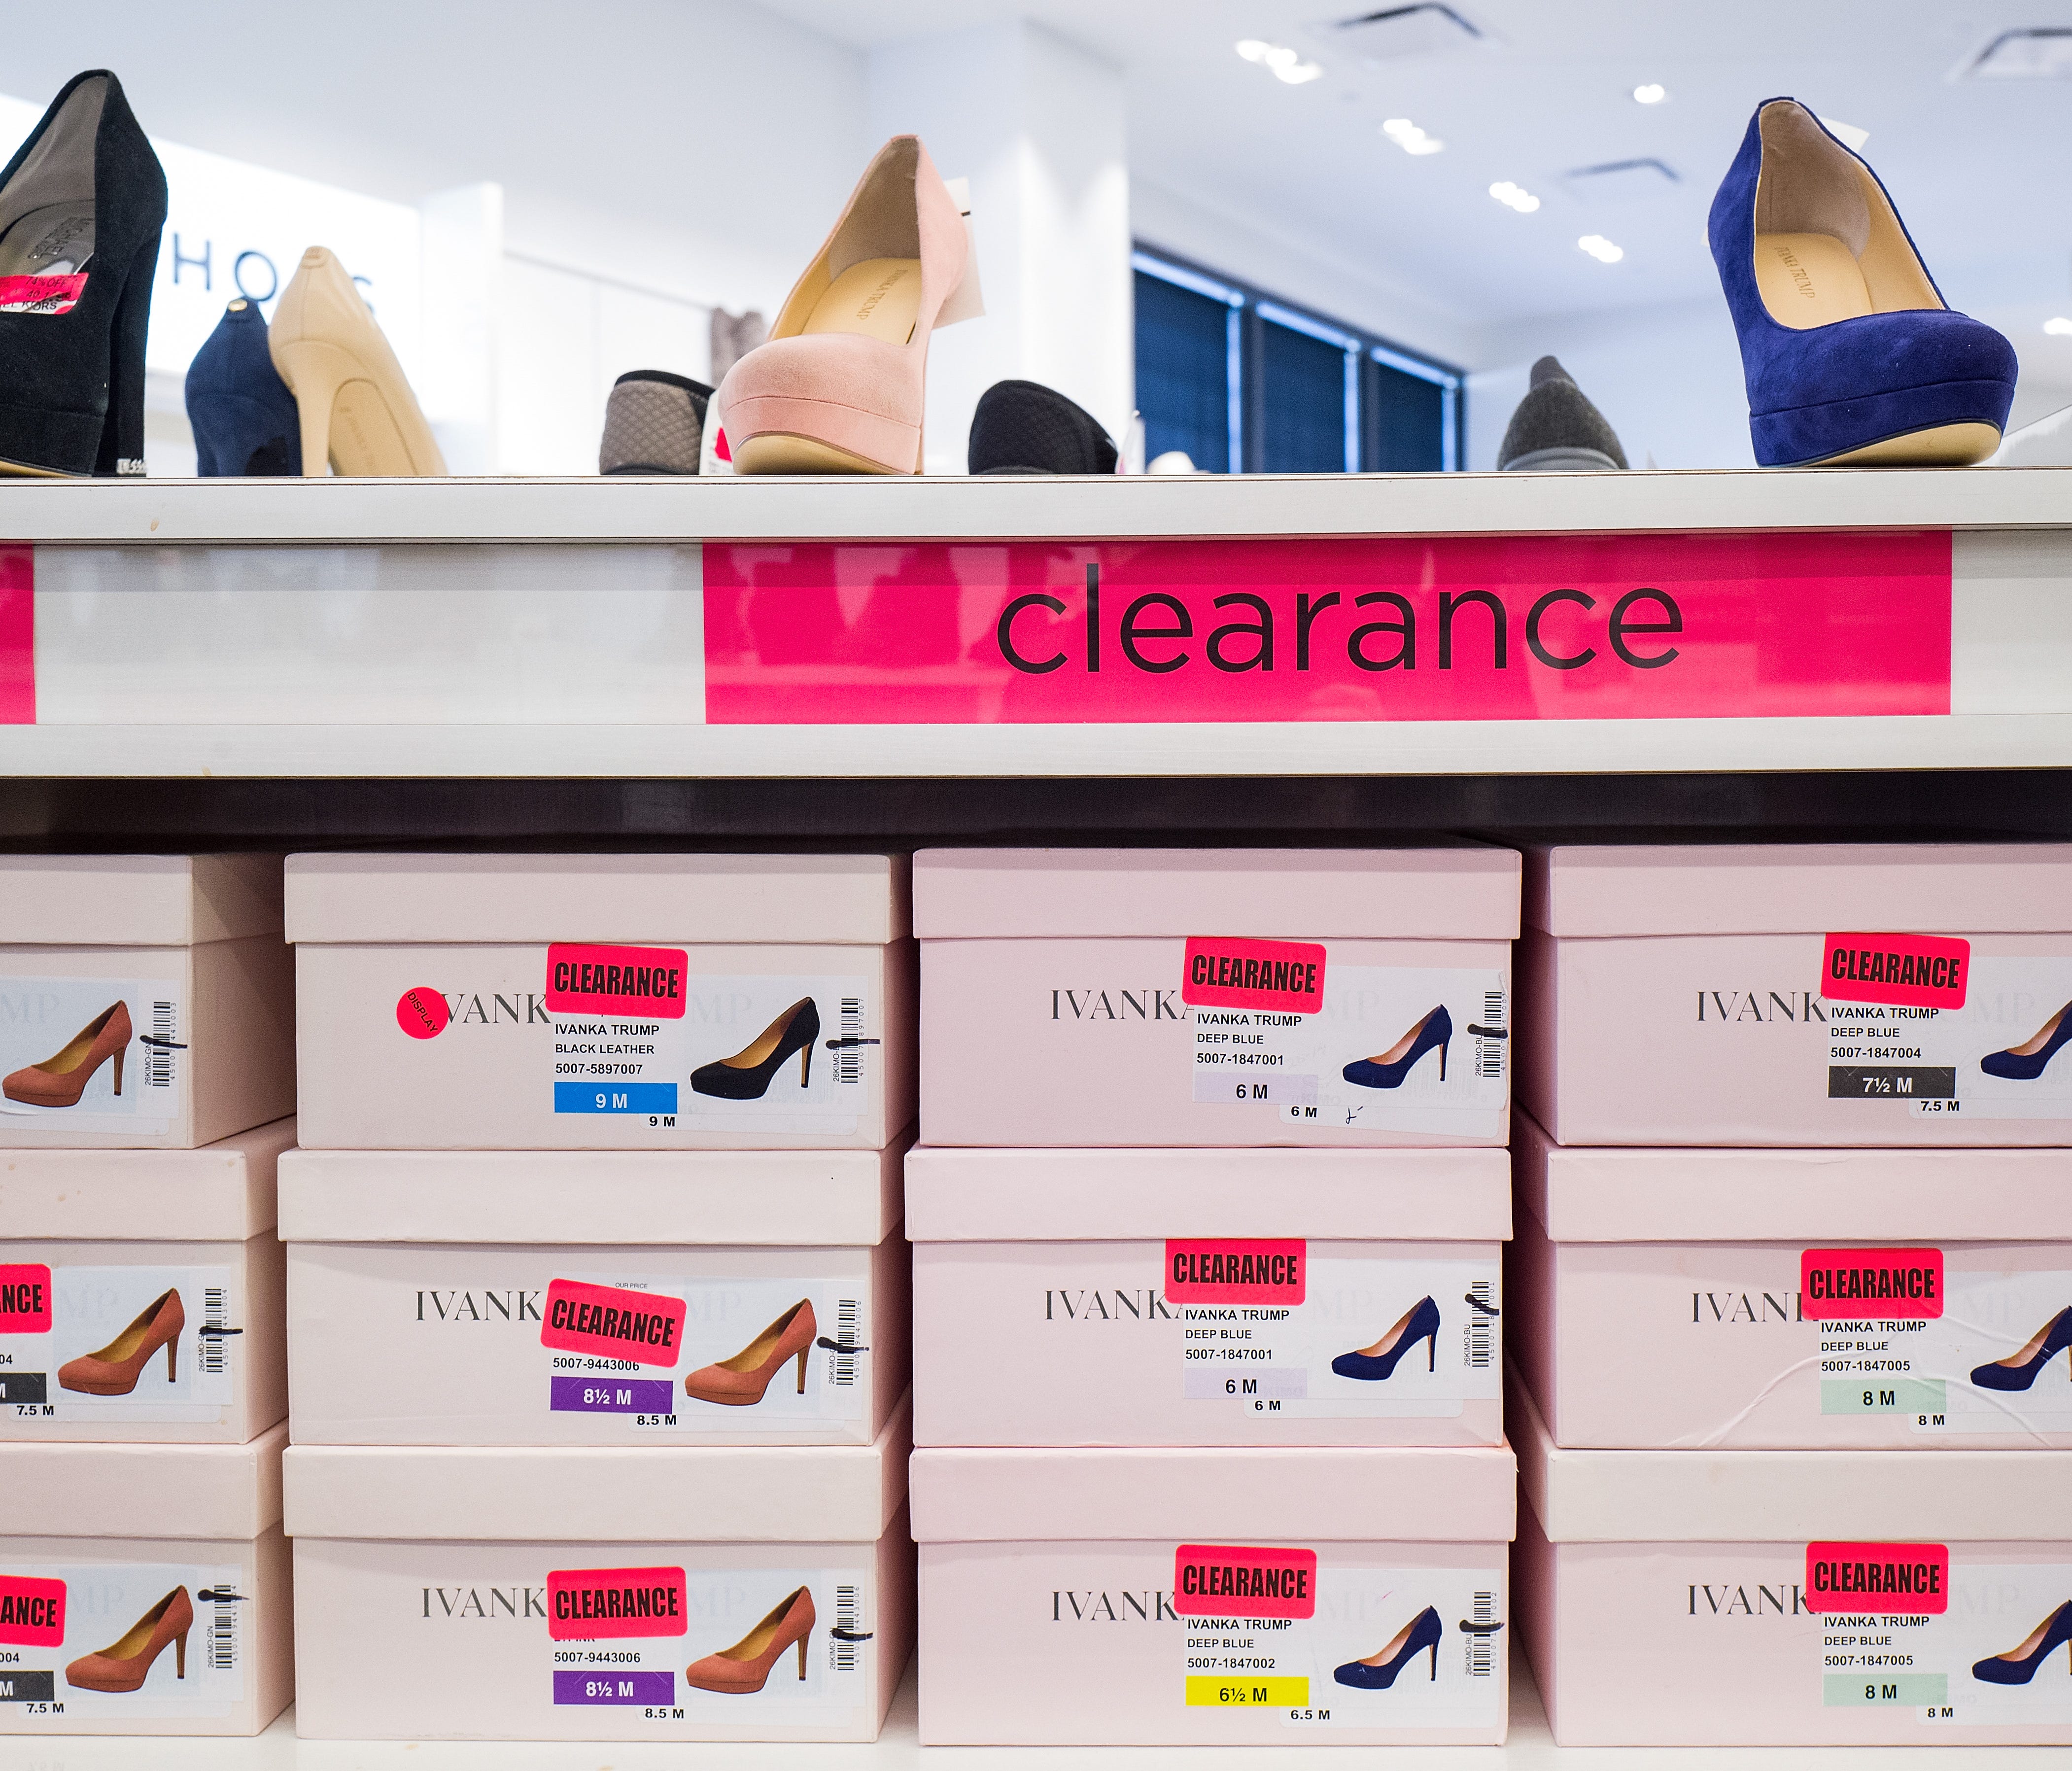 vanka Trump brand high heels are on sale in the clearance section at the Century 21 department store in New York City last week.